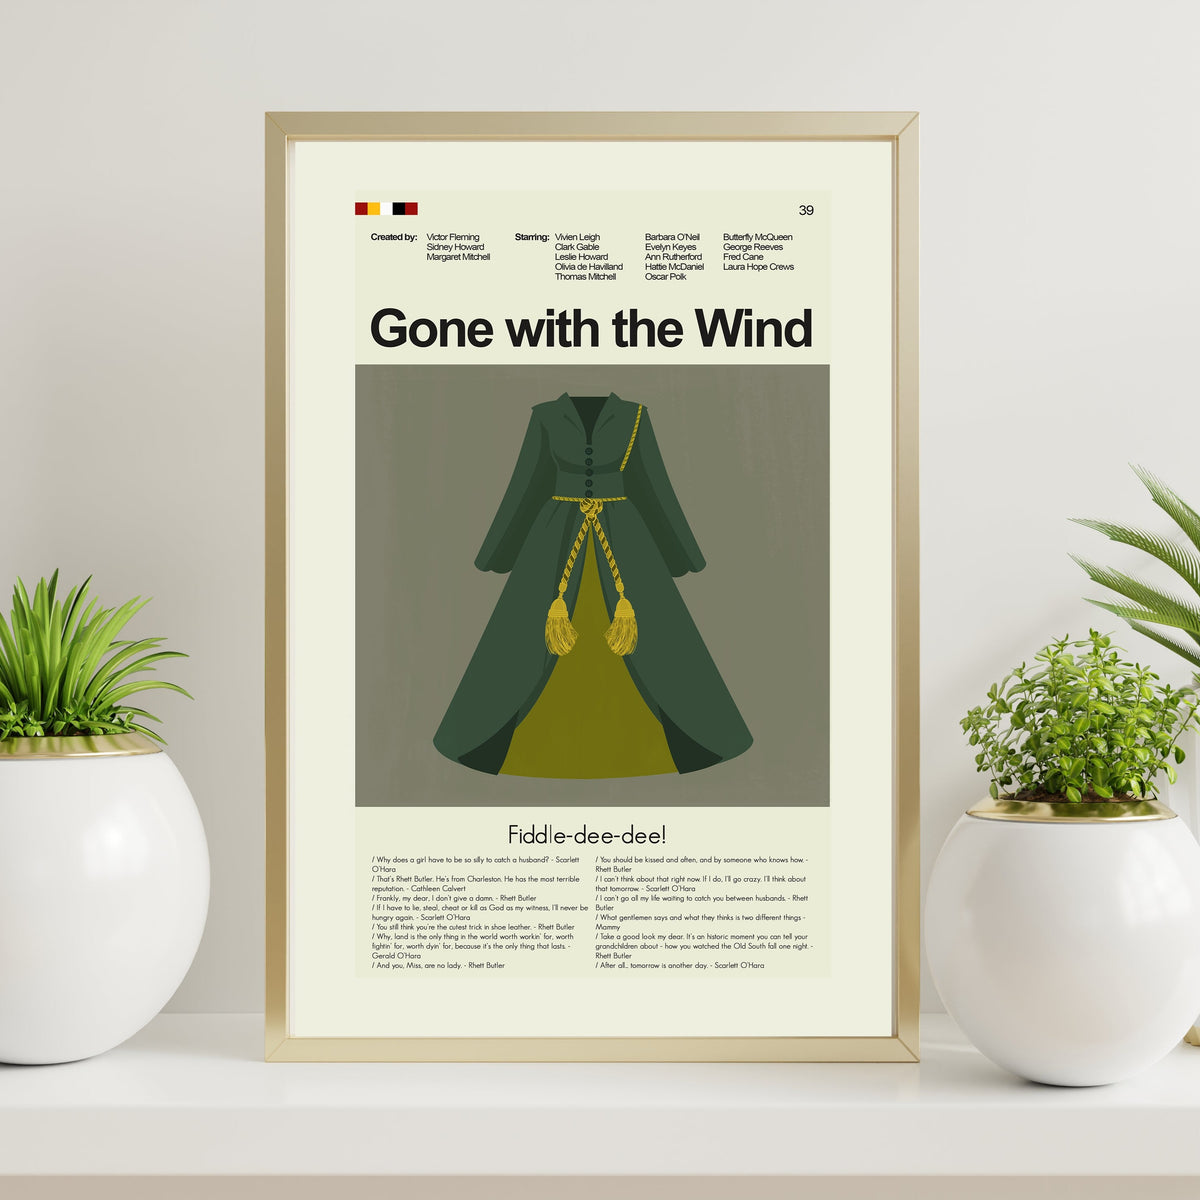 Gone with the Wind - Curtain Dress | 12"x18" or 18"x24" Print only